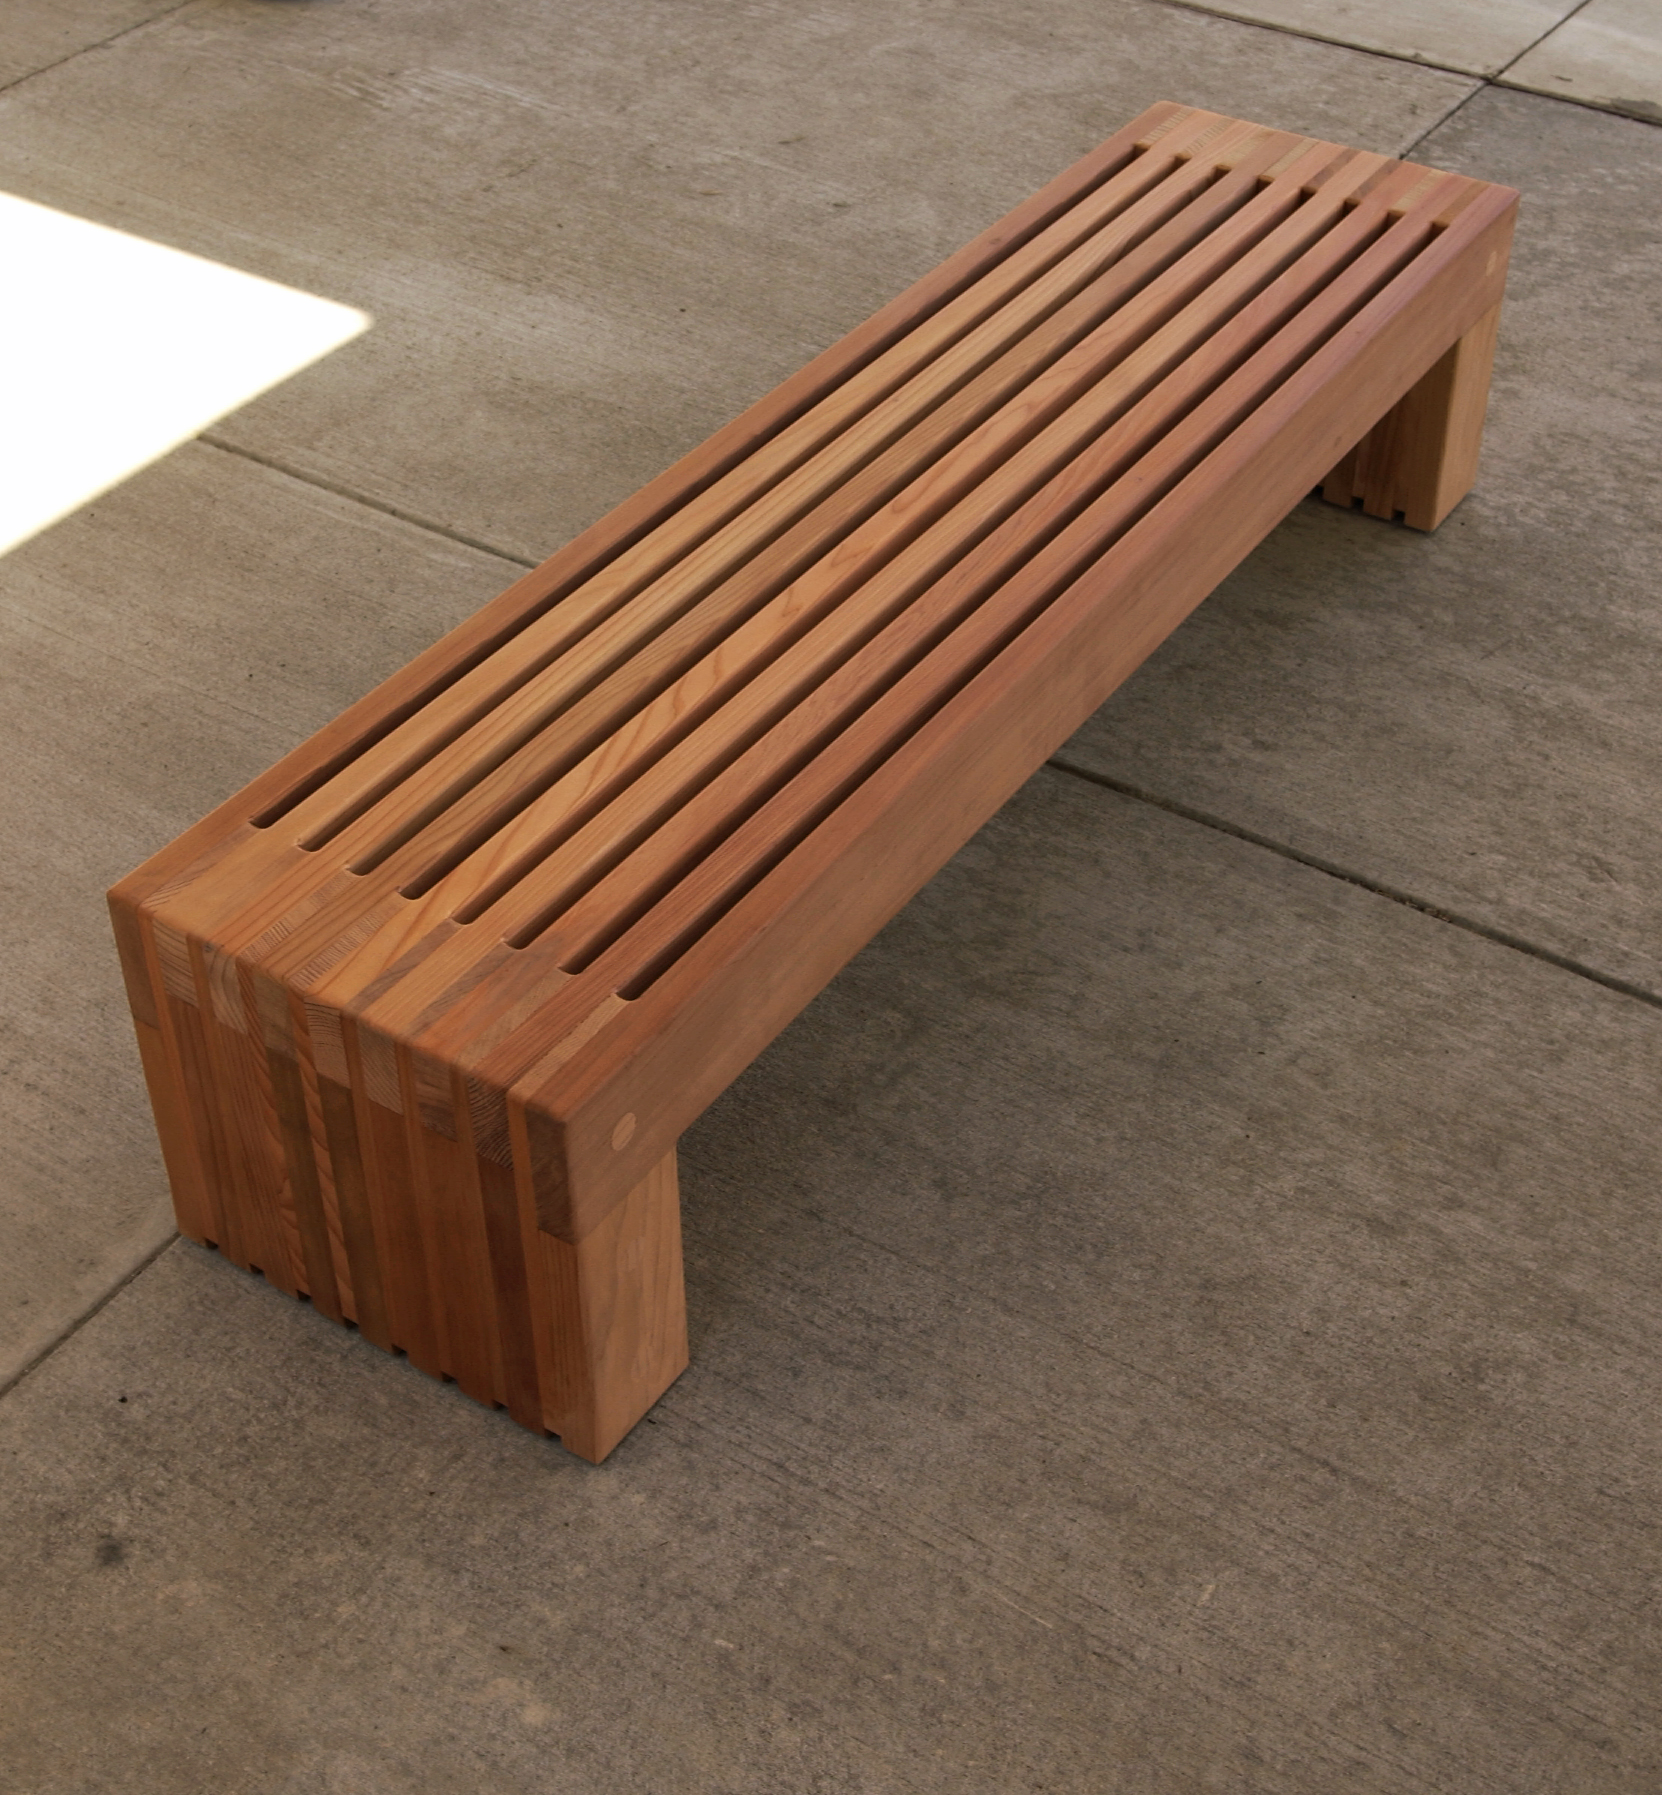 simple wood bench seat plans  Quick Woodworking Projects